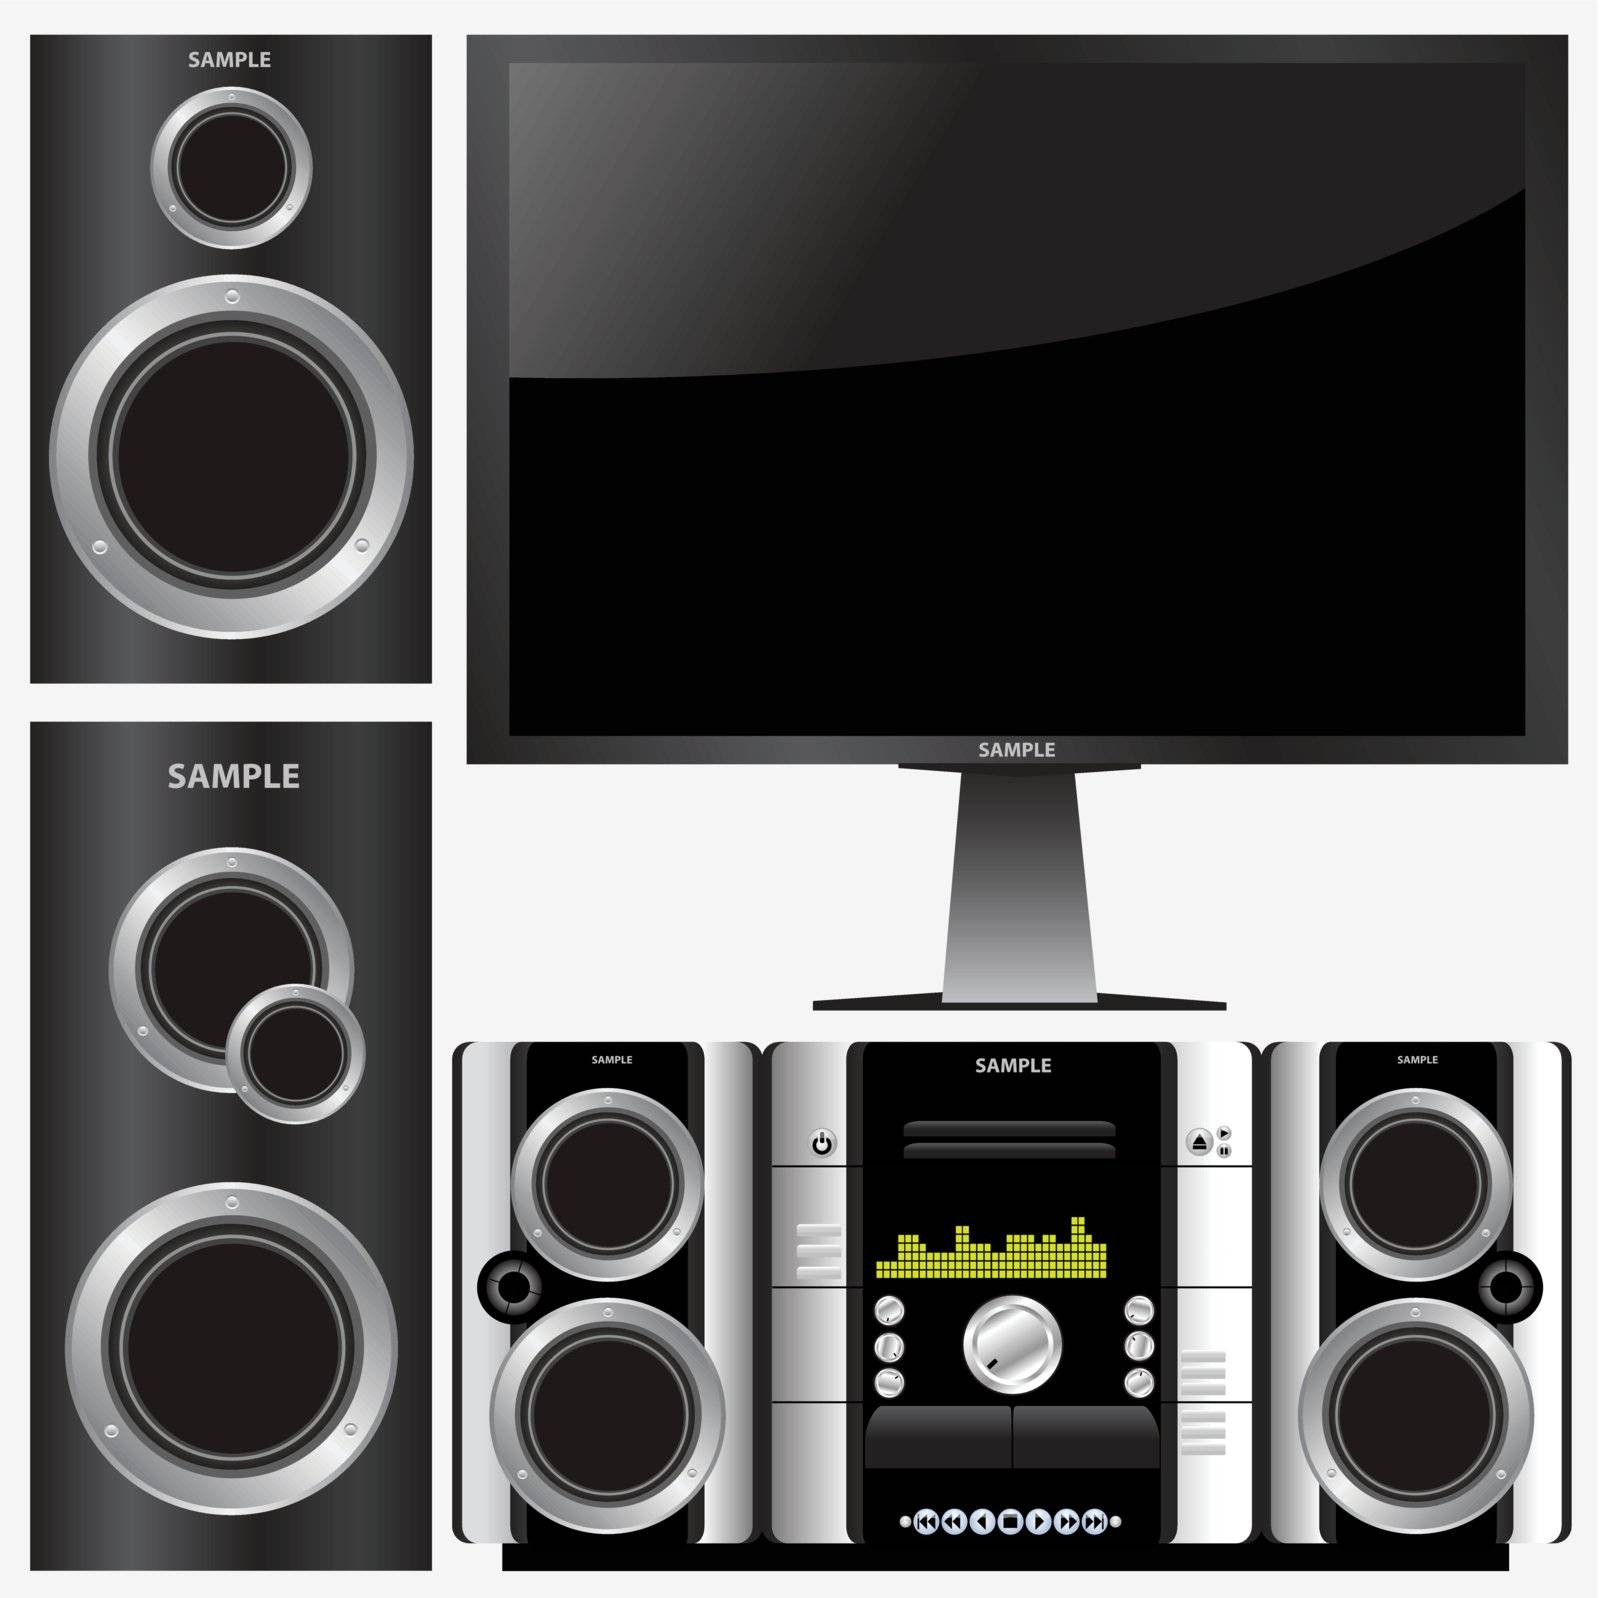 surround stereo system by emirsimsek